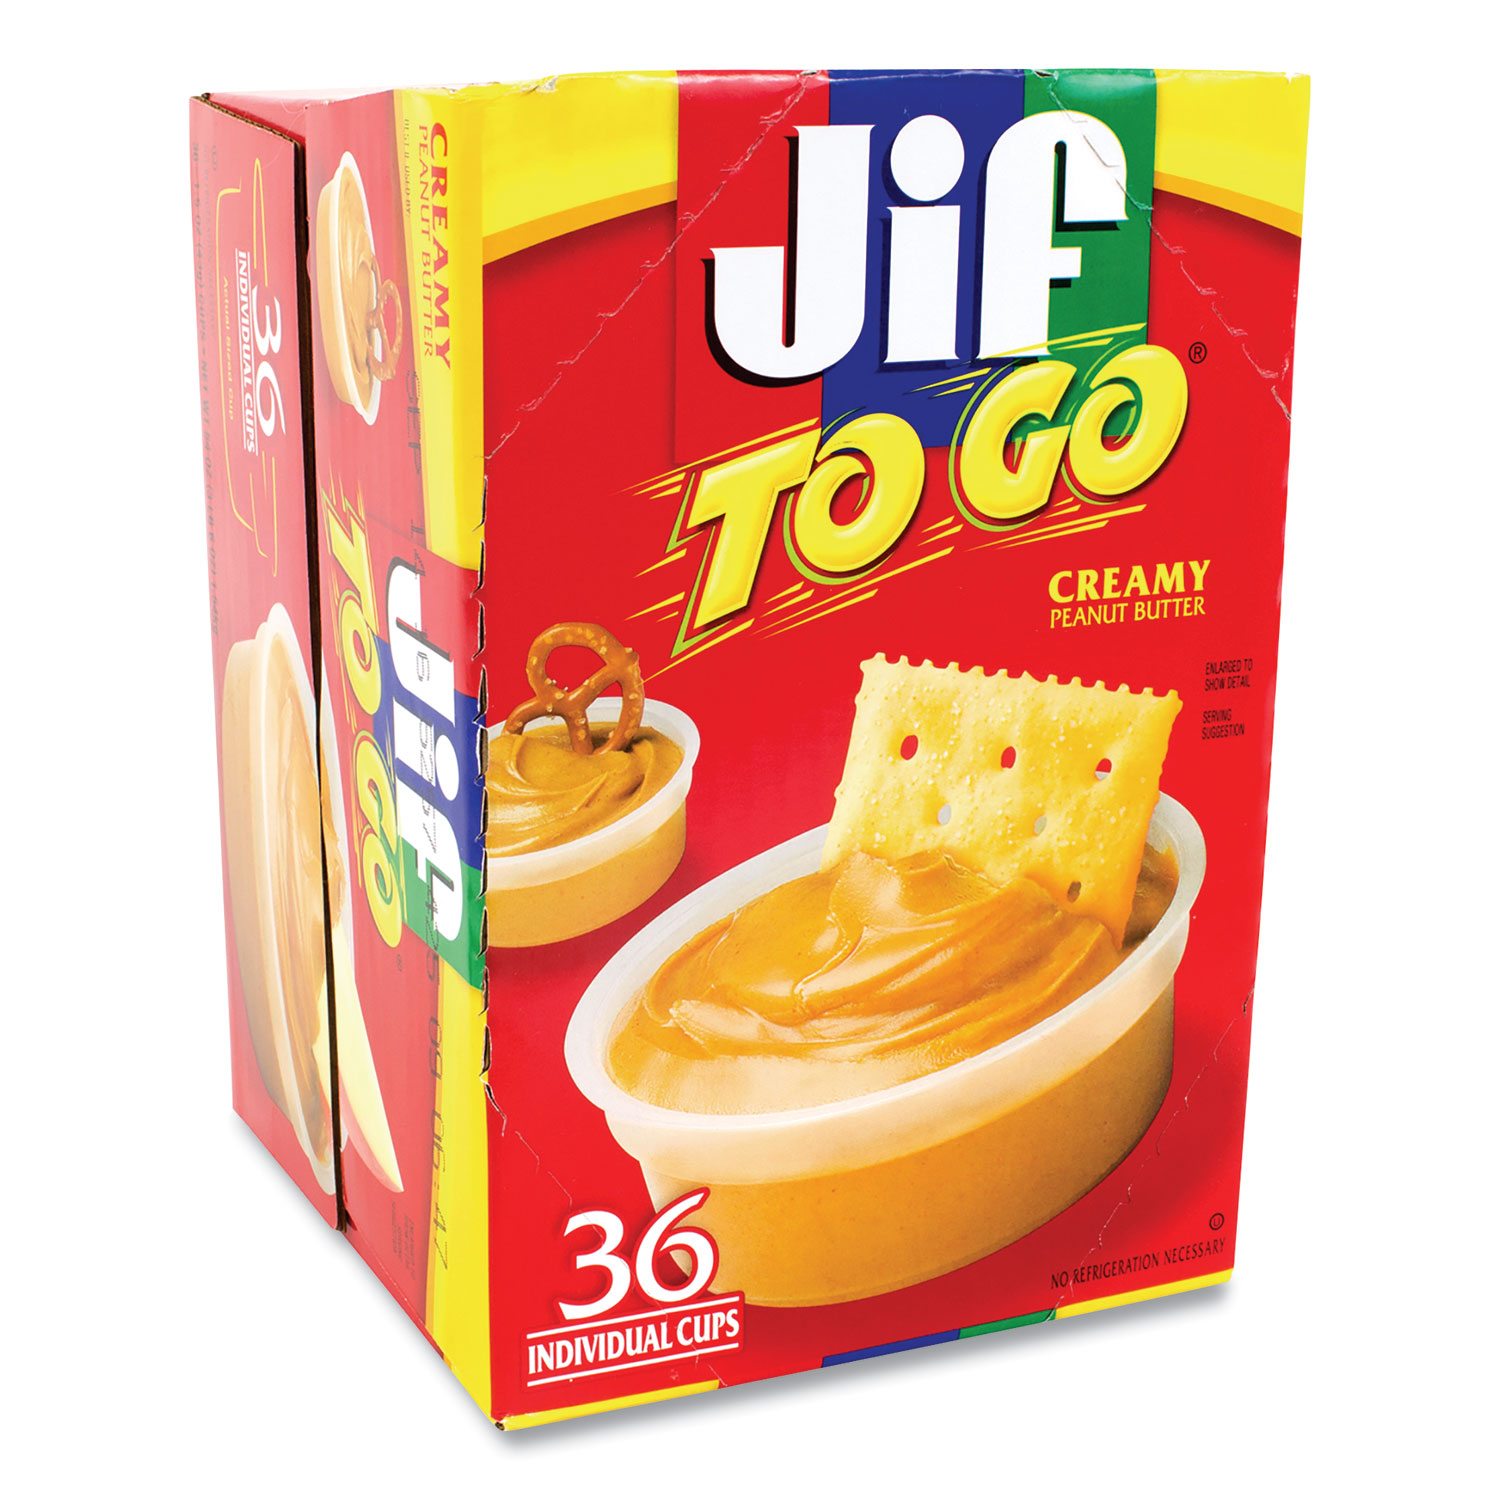 Jif To Go® Spreads, Creamy Peanut Butter, 1.5 oz Cup, 36 Cups/Box, Free Delivery in 1-4 Business Days